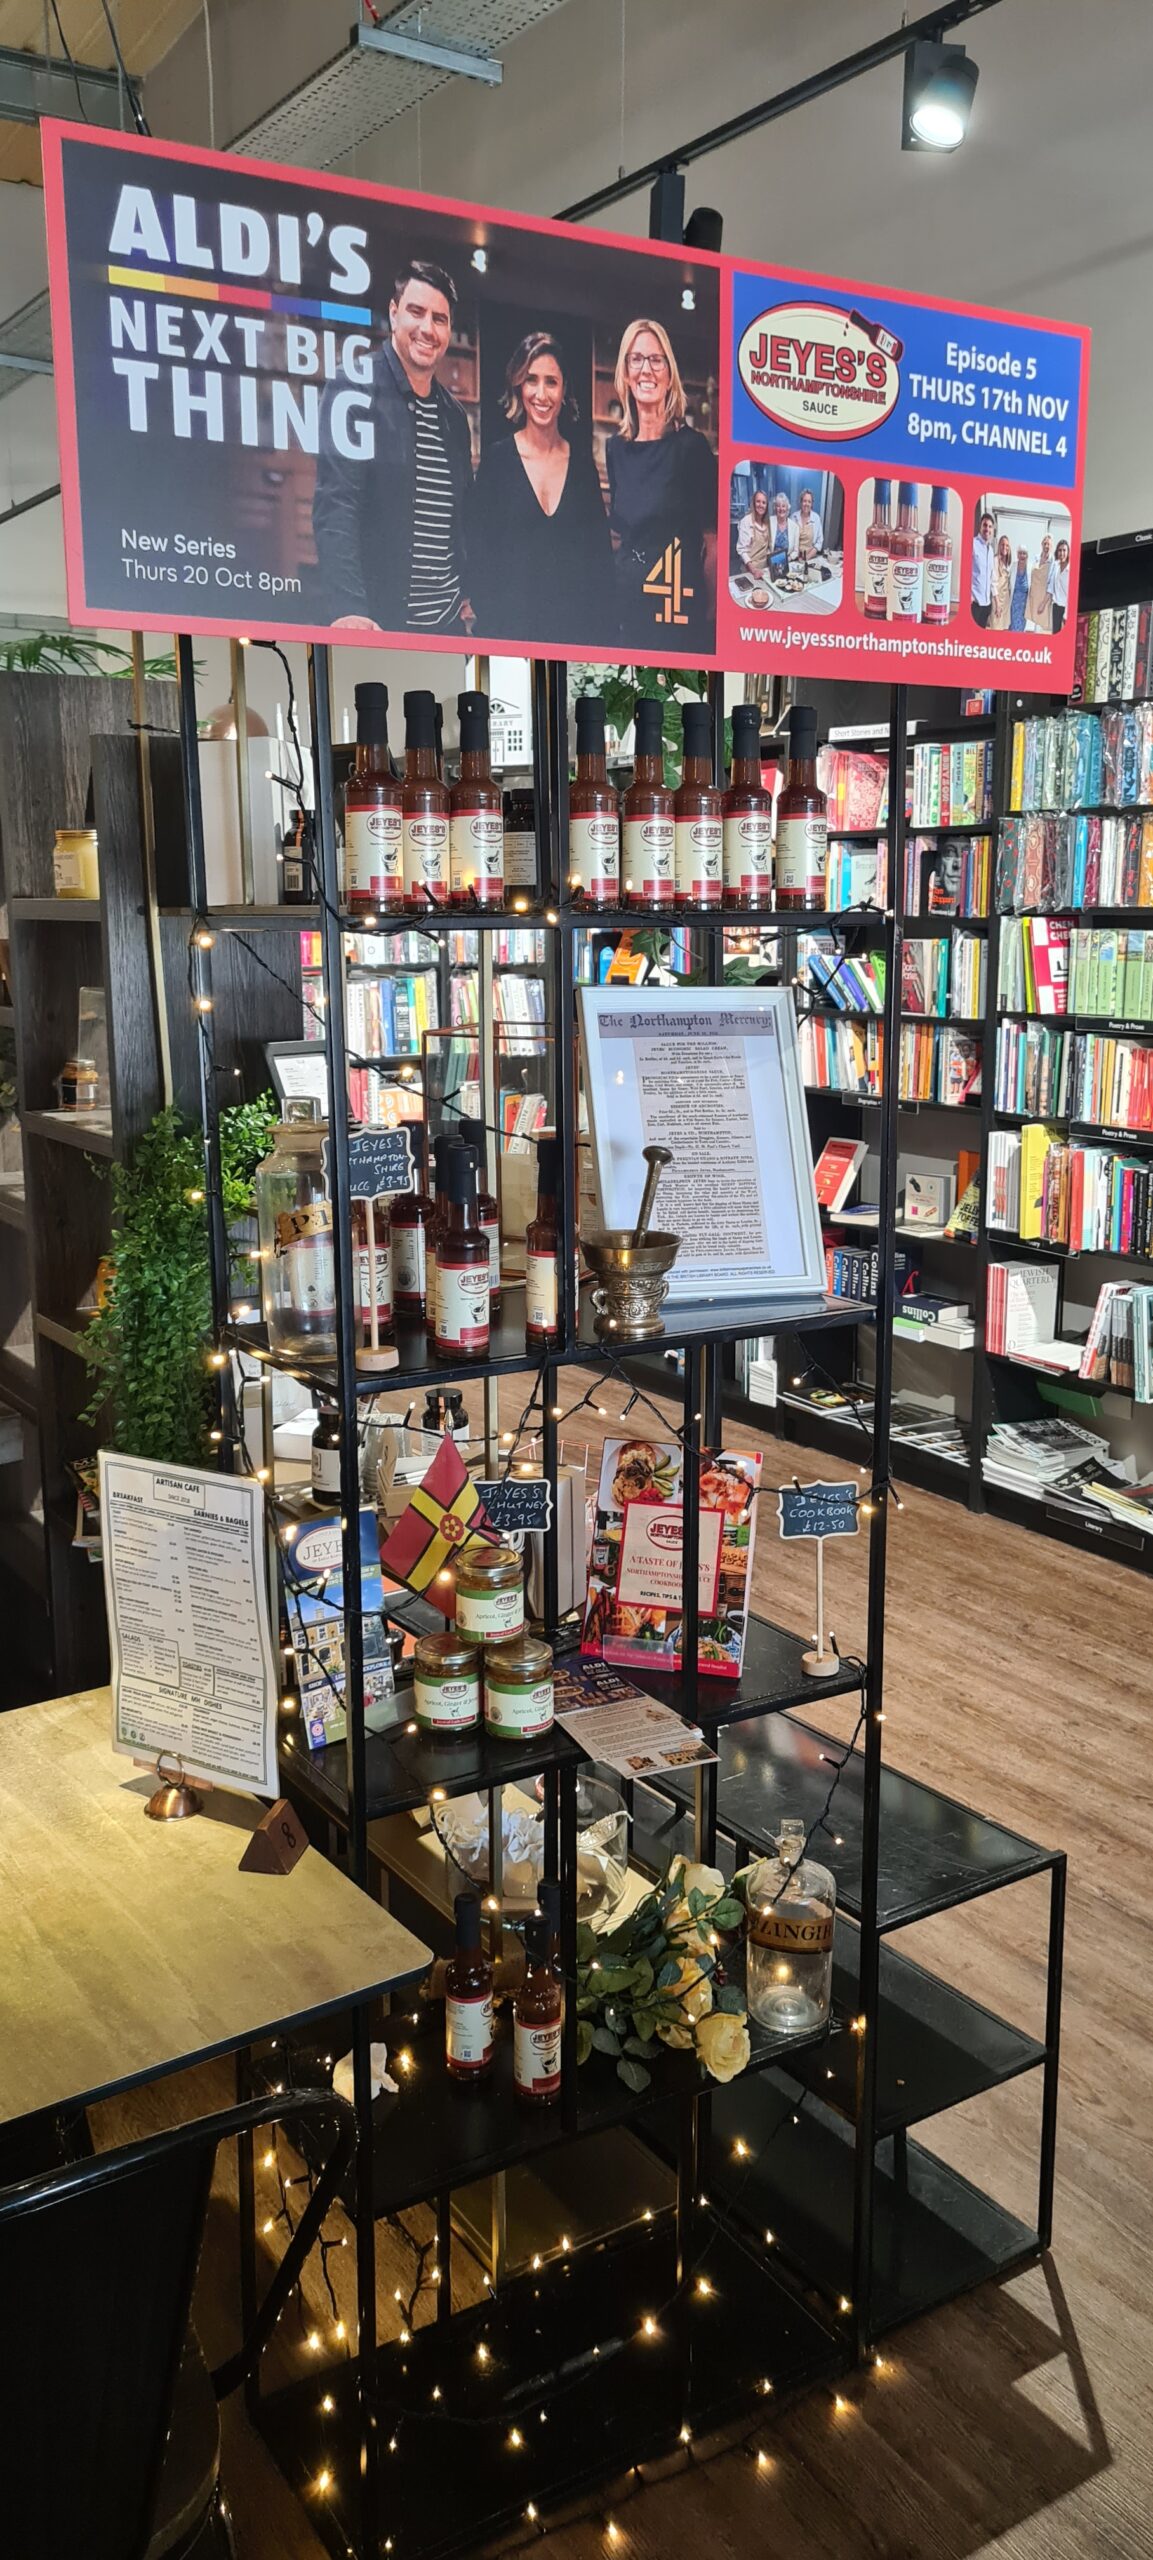 IMAGE: A black display unit with a variety of Jeyes's Northamptonshire Sauce products. A mortar and pestle and twinkling lights are also on display.